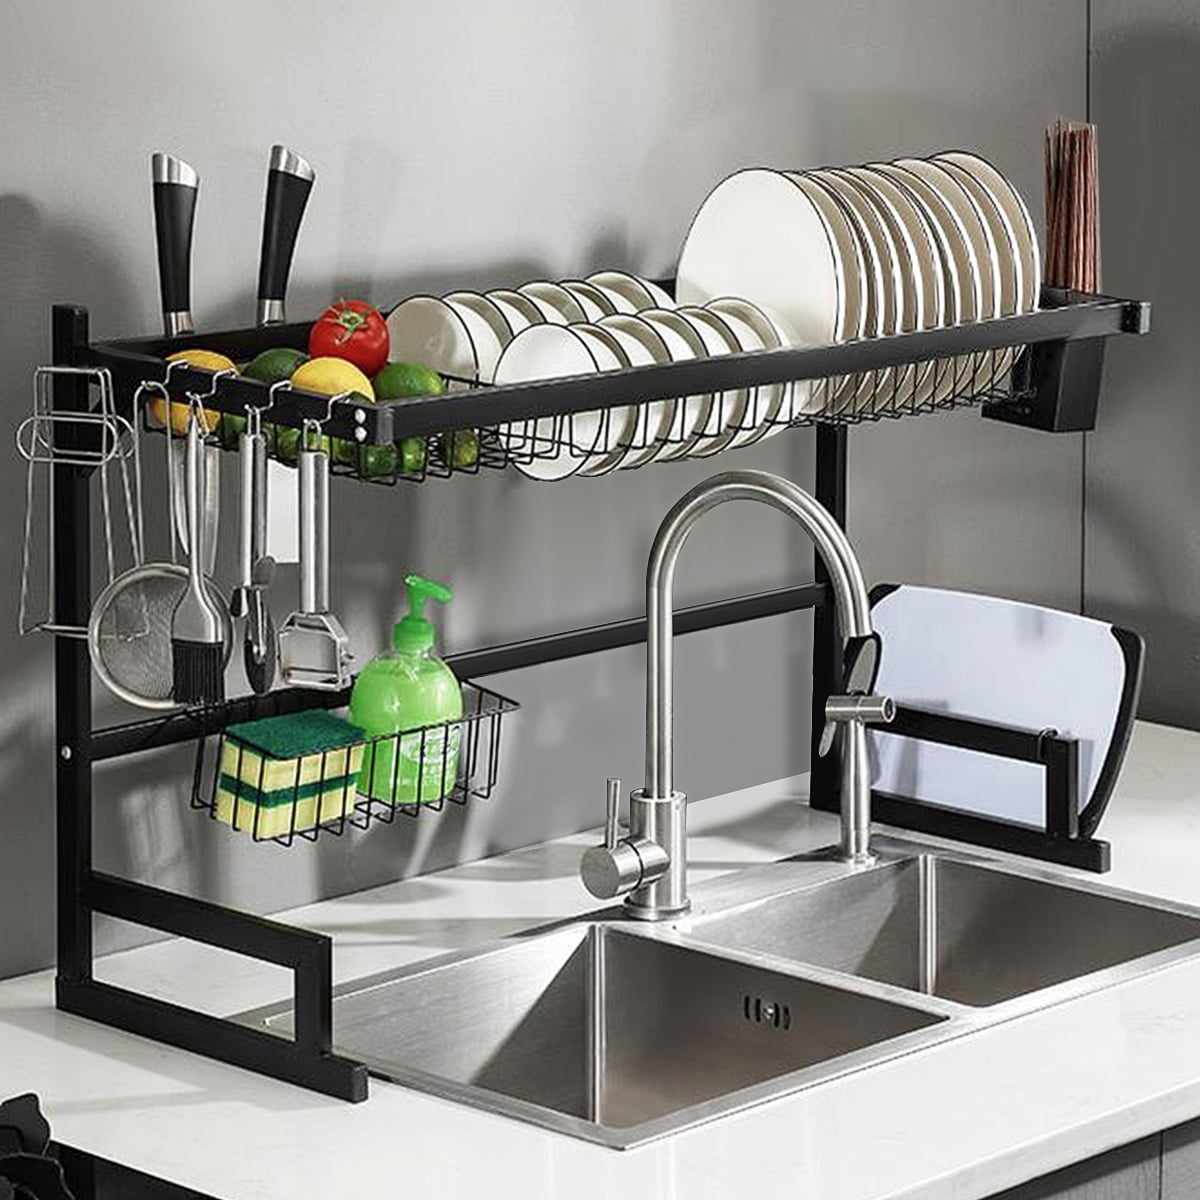 Stainless Steel 2 Tier Dish Drying Rack - Over Sink, Drainer Shelf Stainless Steel Dish Dry Rack